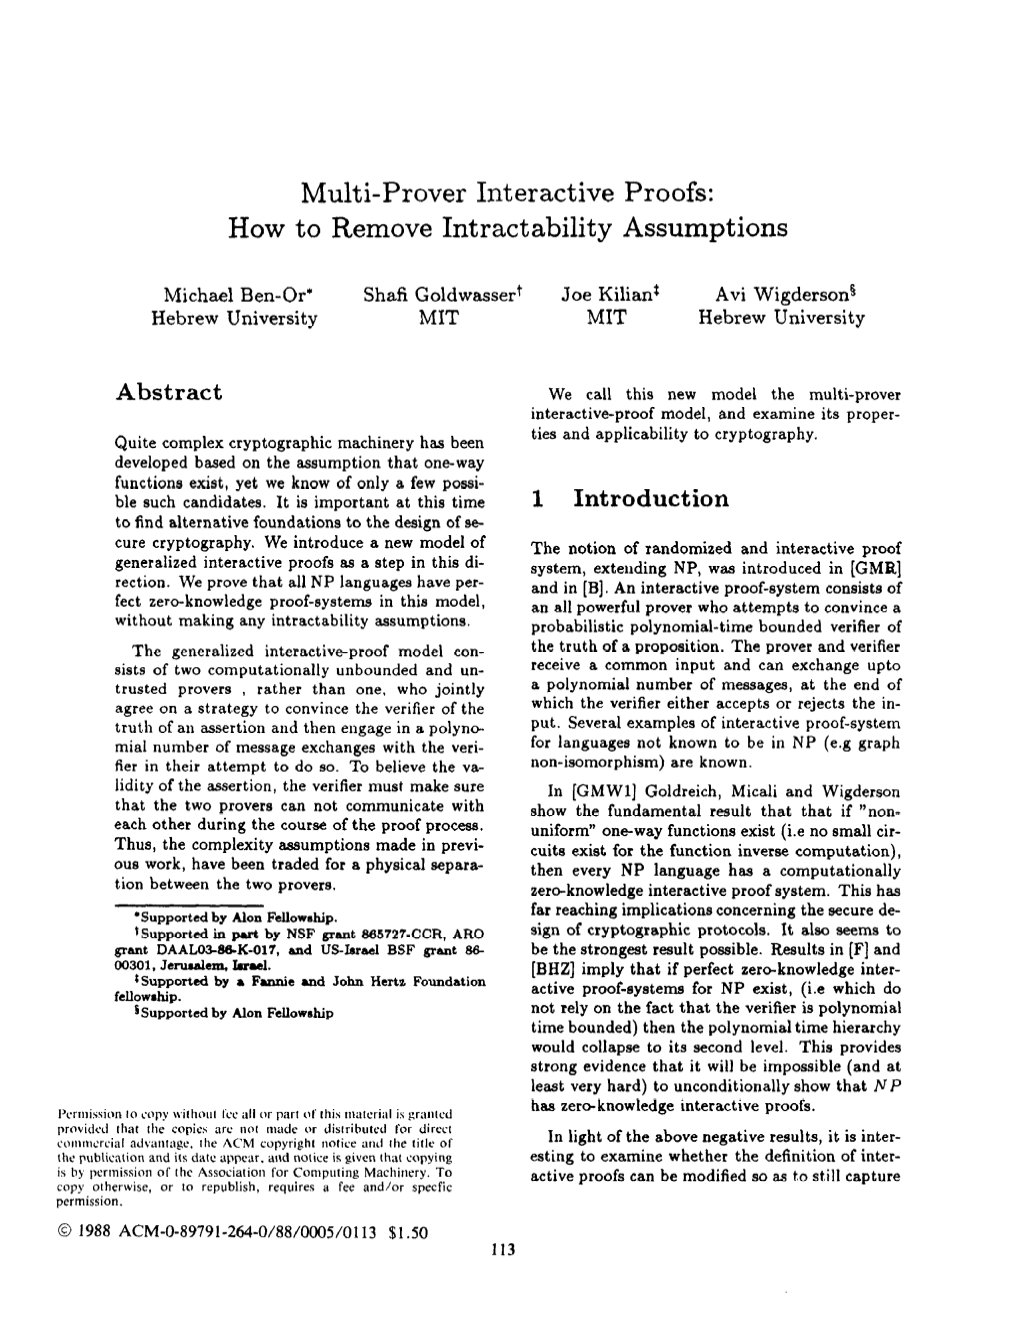 Multi-Prover Interactive Proofs: How to Remove Intractability Assumptions